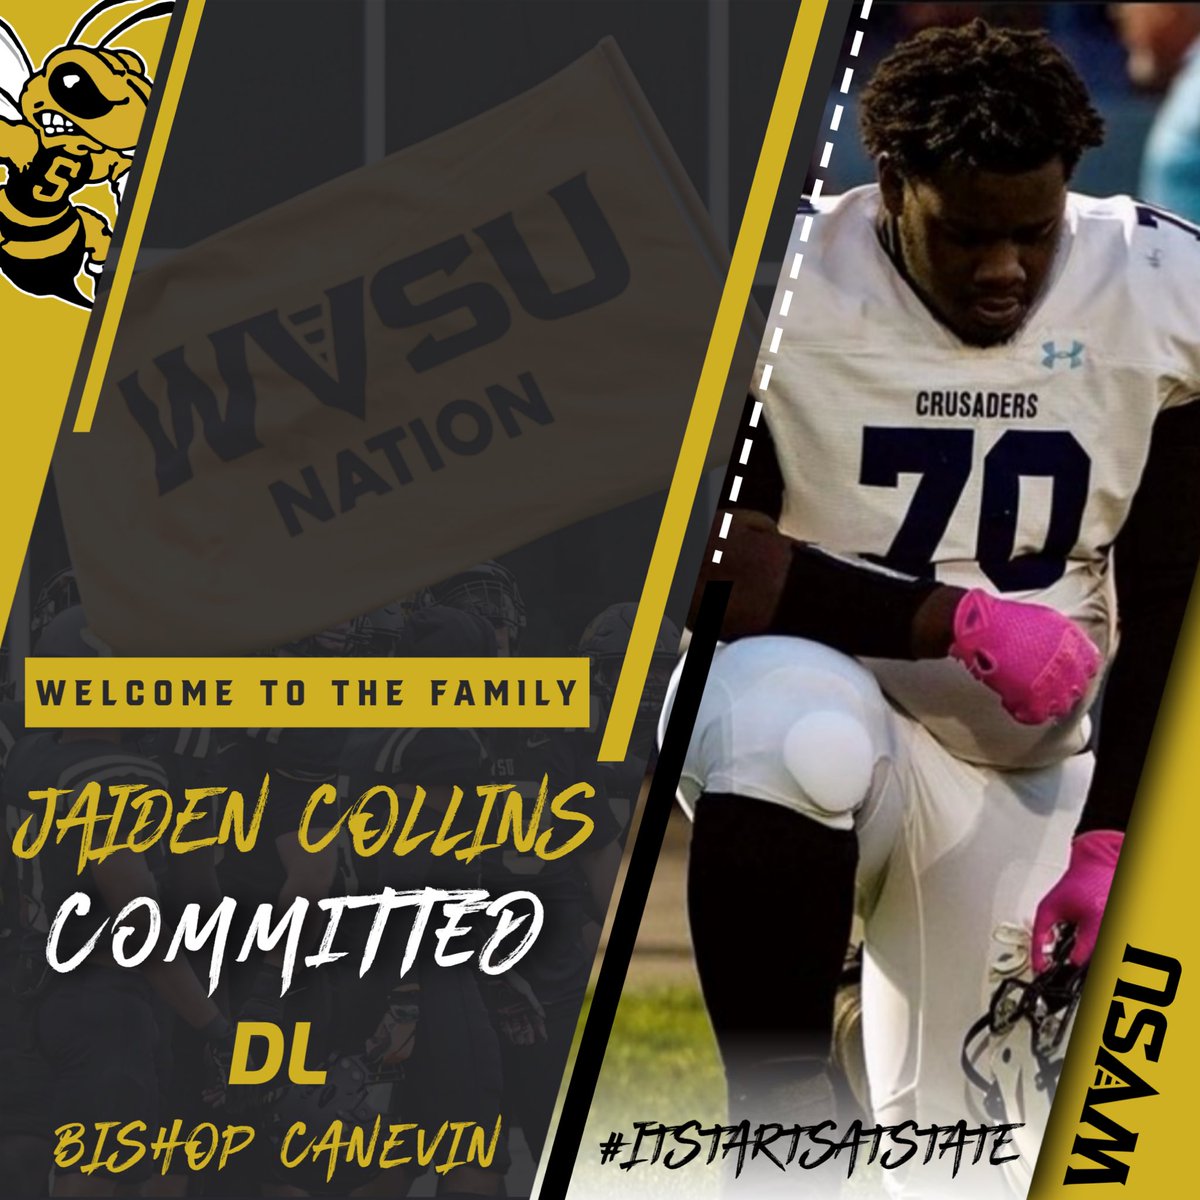 1000% committed to @WvsuFootball @coachbuckle @Coach_Rich4 Blessed and excited to start my next chapter  #ItStartsAtState